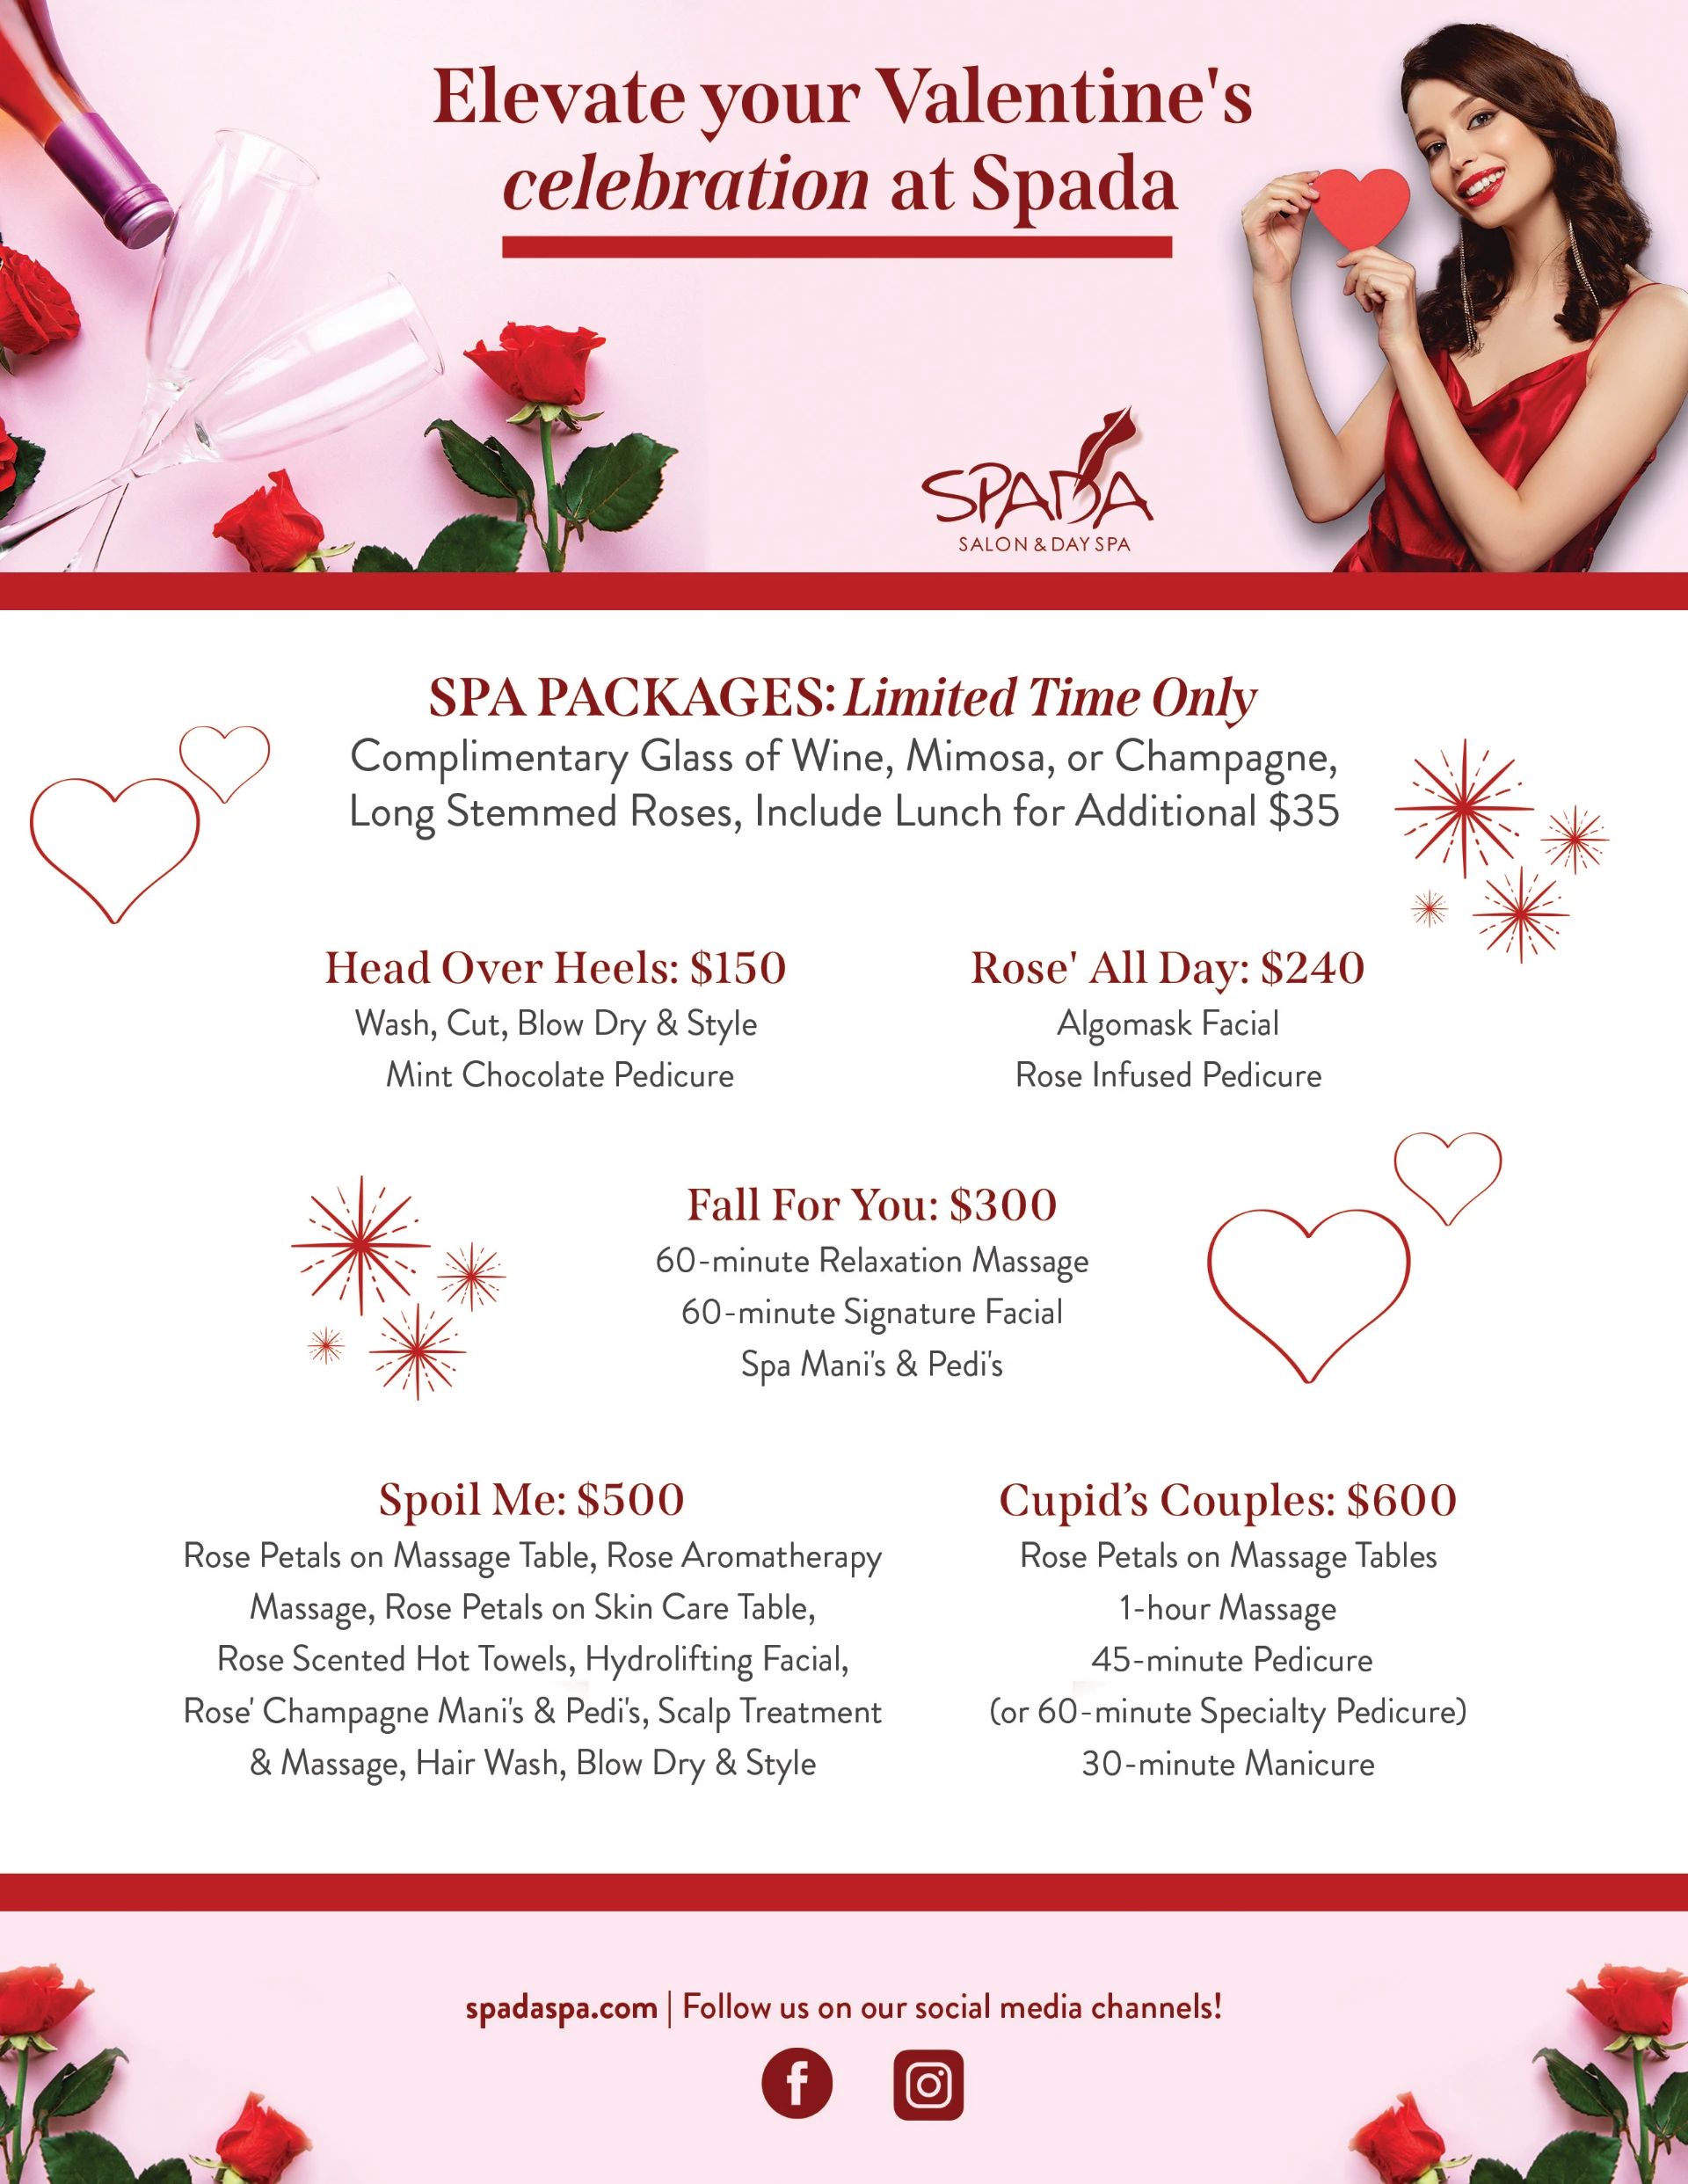 Elevate your Valentine's celebration at Spada. Spa Packages: Limited Time Only. Complimentary glass of wine, mimosa, or Champagne, Long Stemmed Roses, Include Lunch for Additional $35. Head Over Heels: $150. Rosé All Day: $240. Fall For You: $300. Spoil Me: $500. Cupid's Couples: $600.